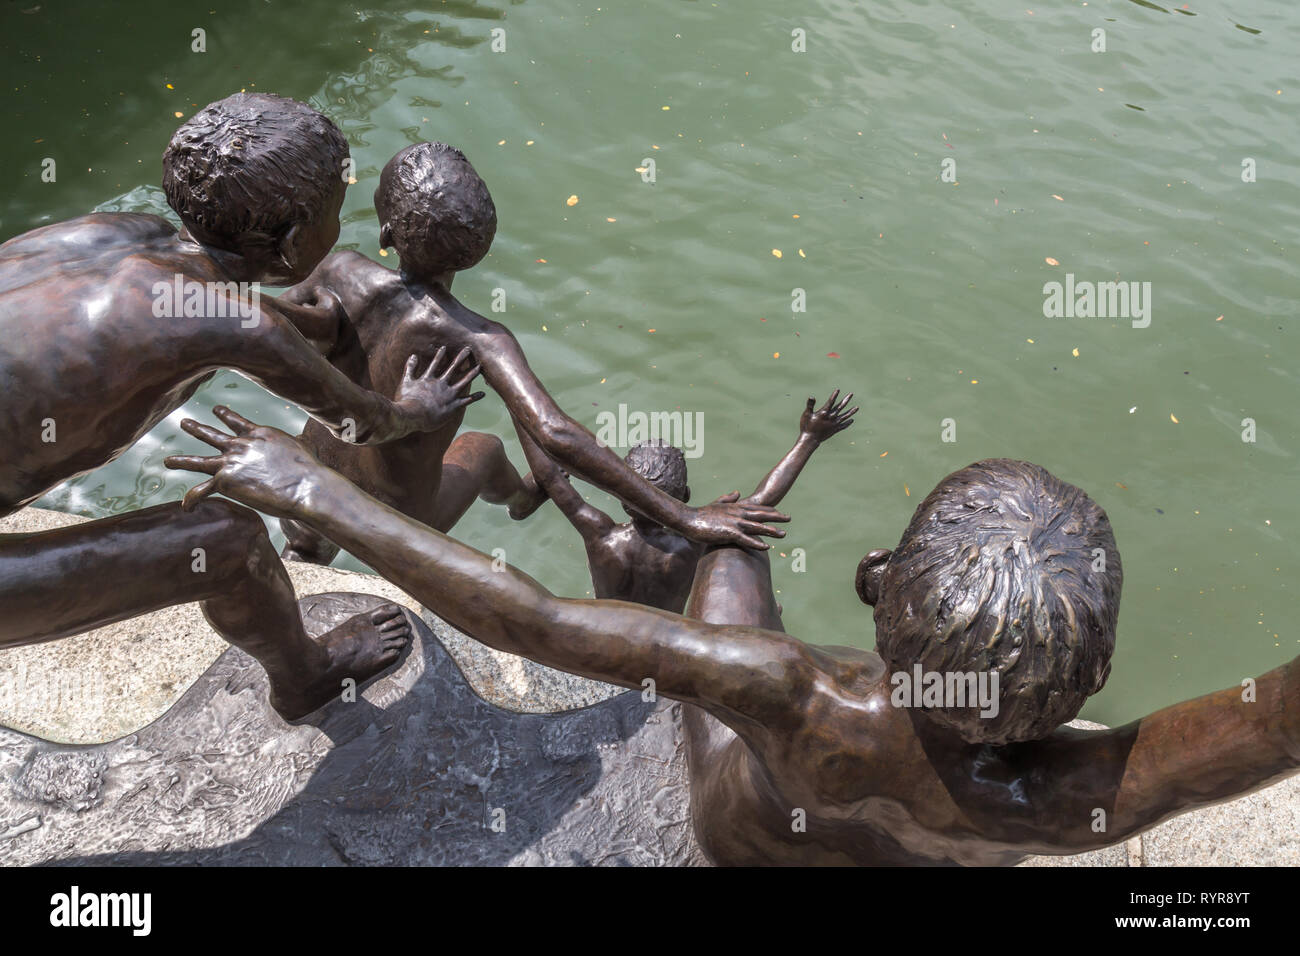 A metal sculpture of Five young boys by the river in Singapore Stock Photo